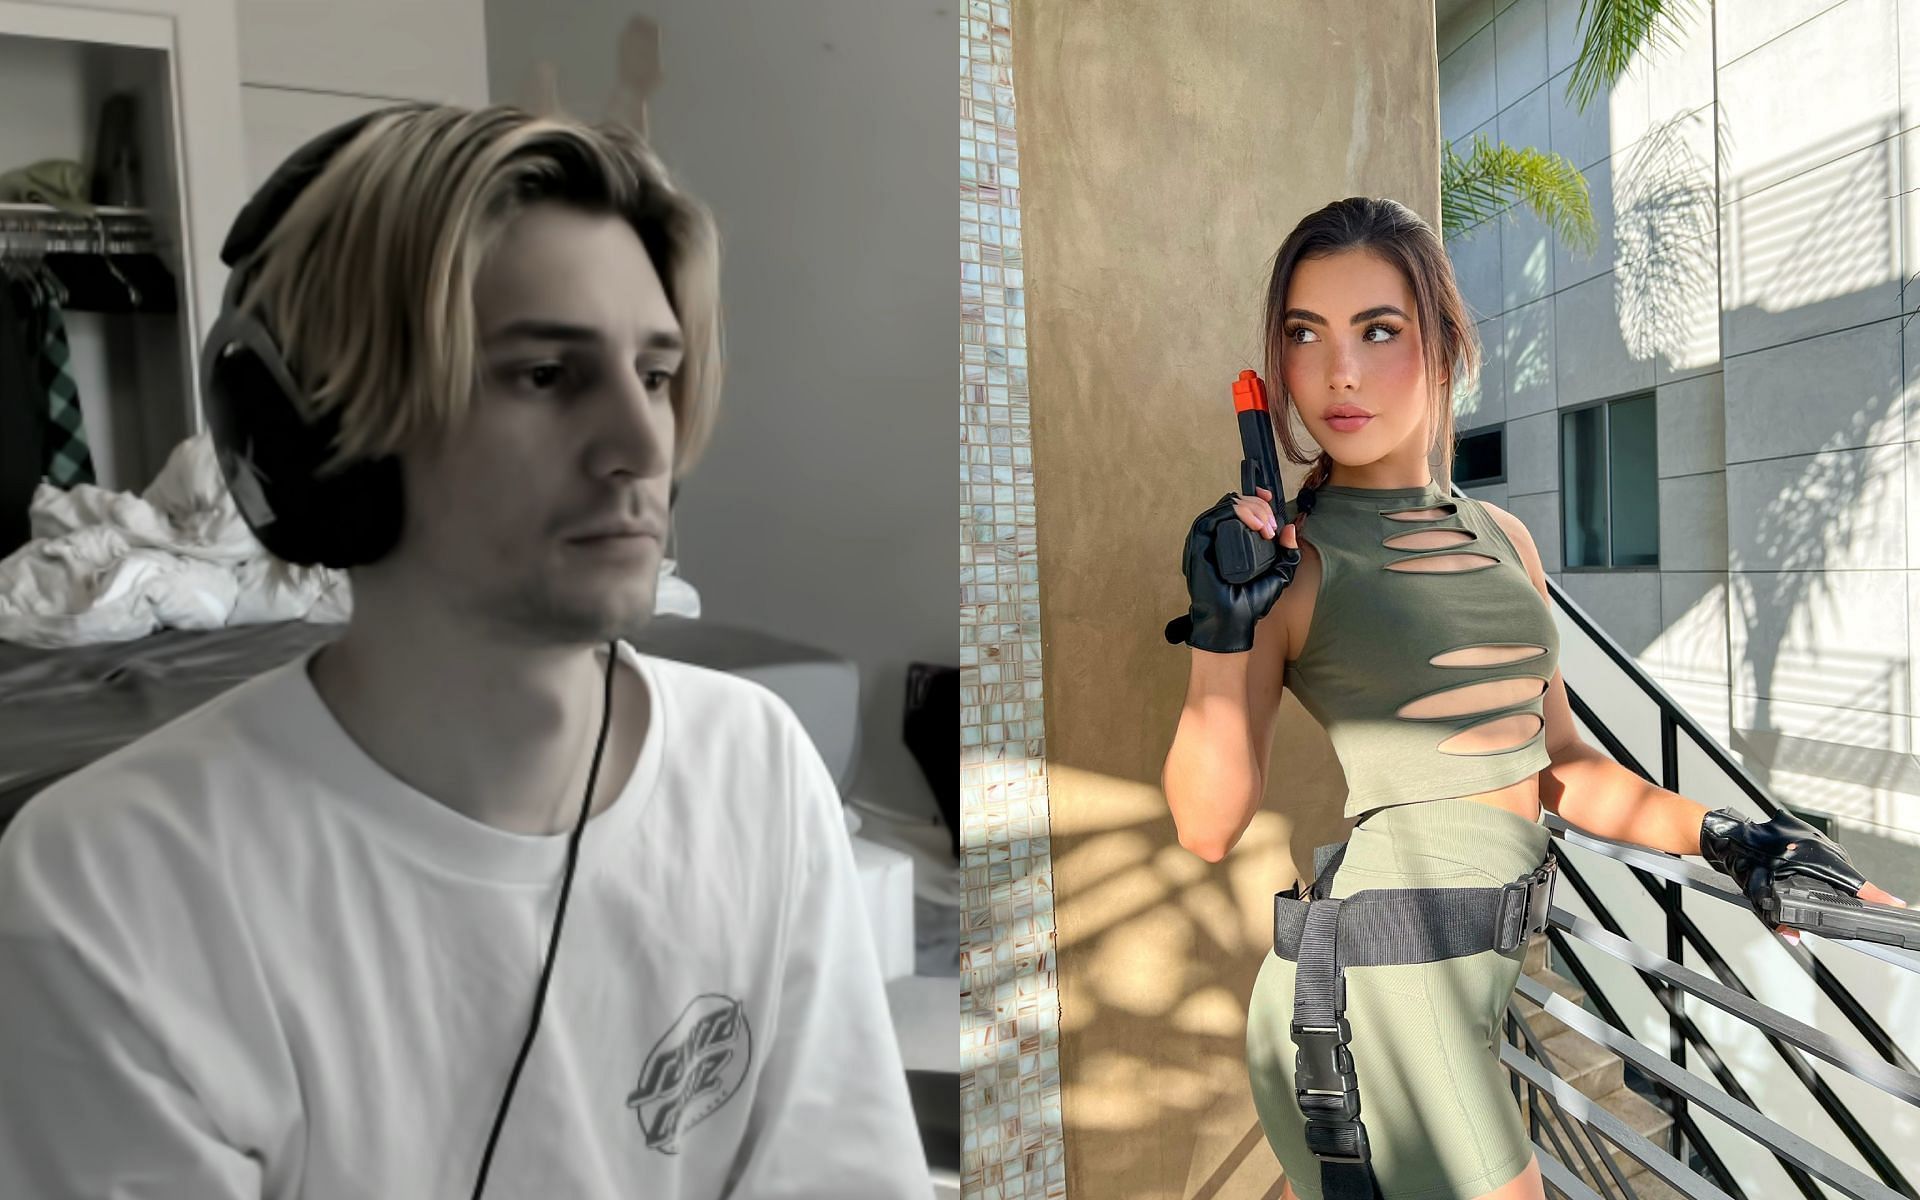 She was so f***ing annoying- xQc calls out Andrea Botez following